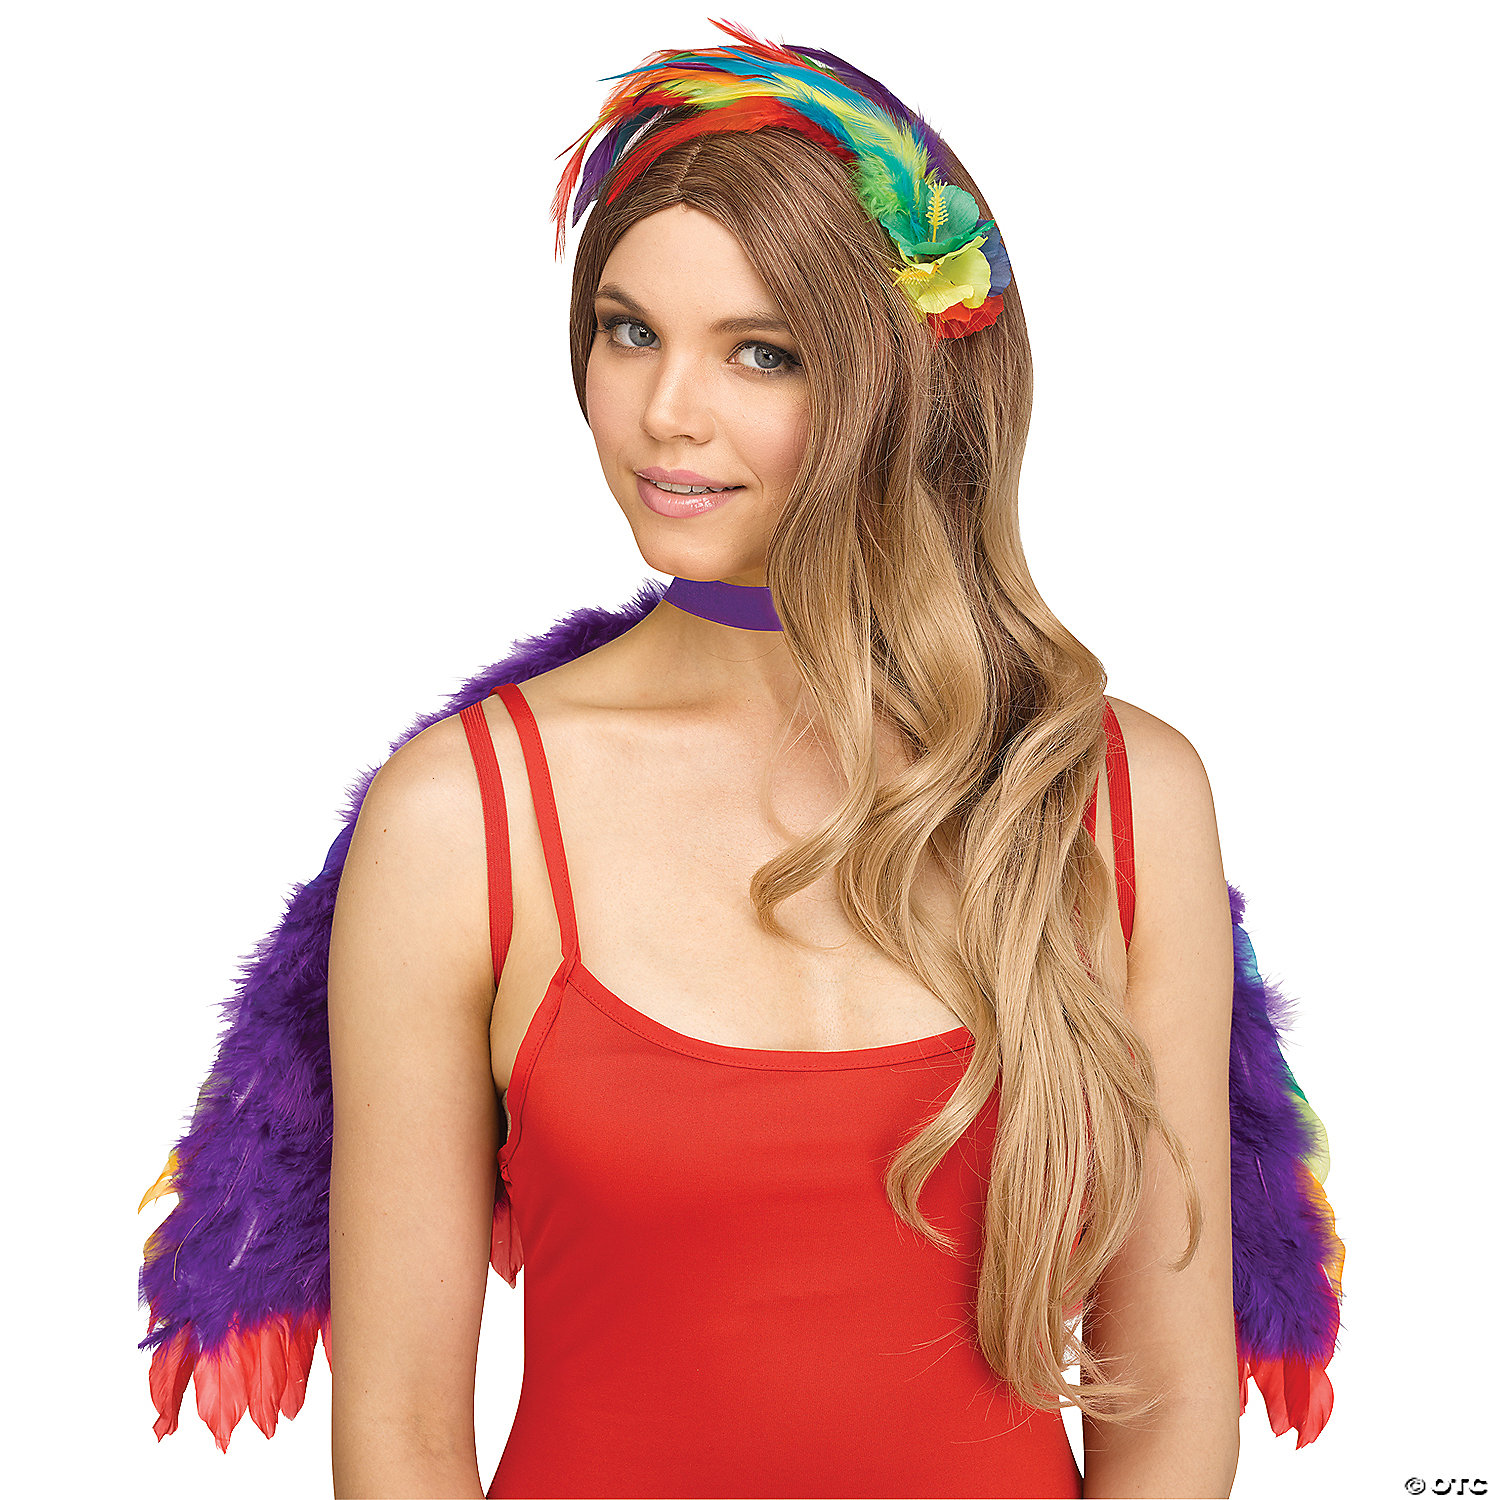 BIRDS OF A FEATHER COSTUME KIT - HALLOWEEN